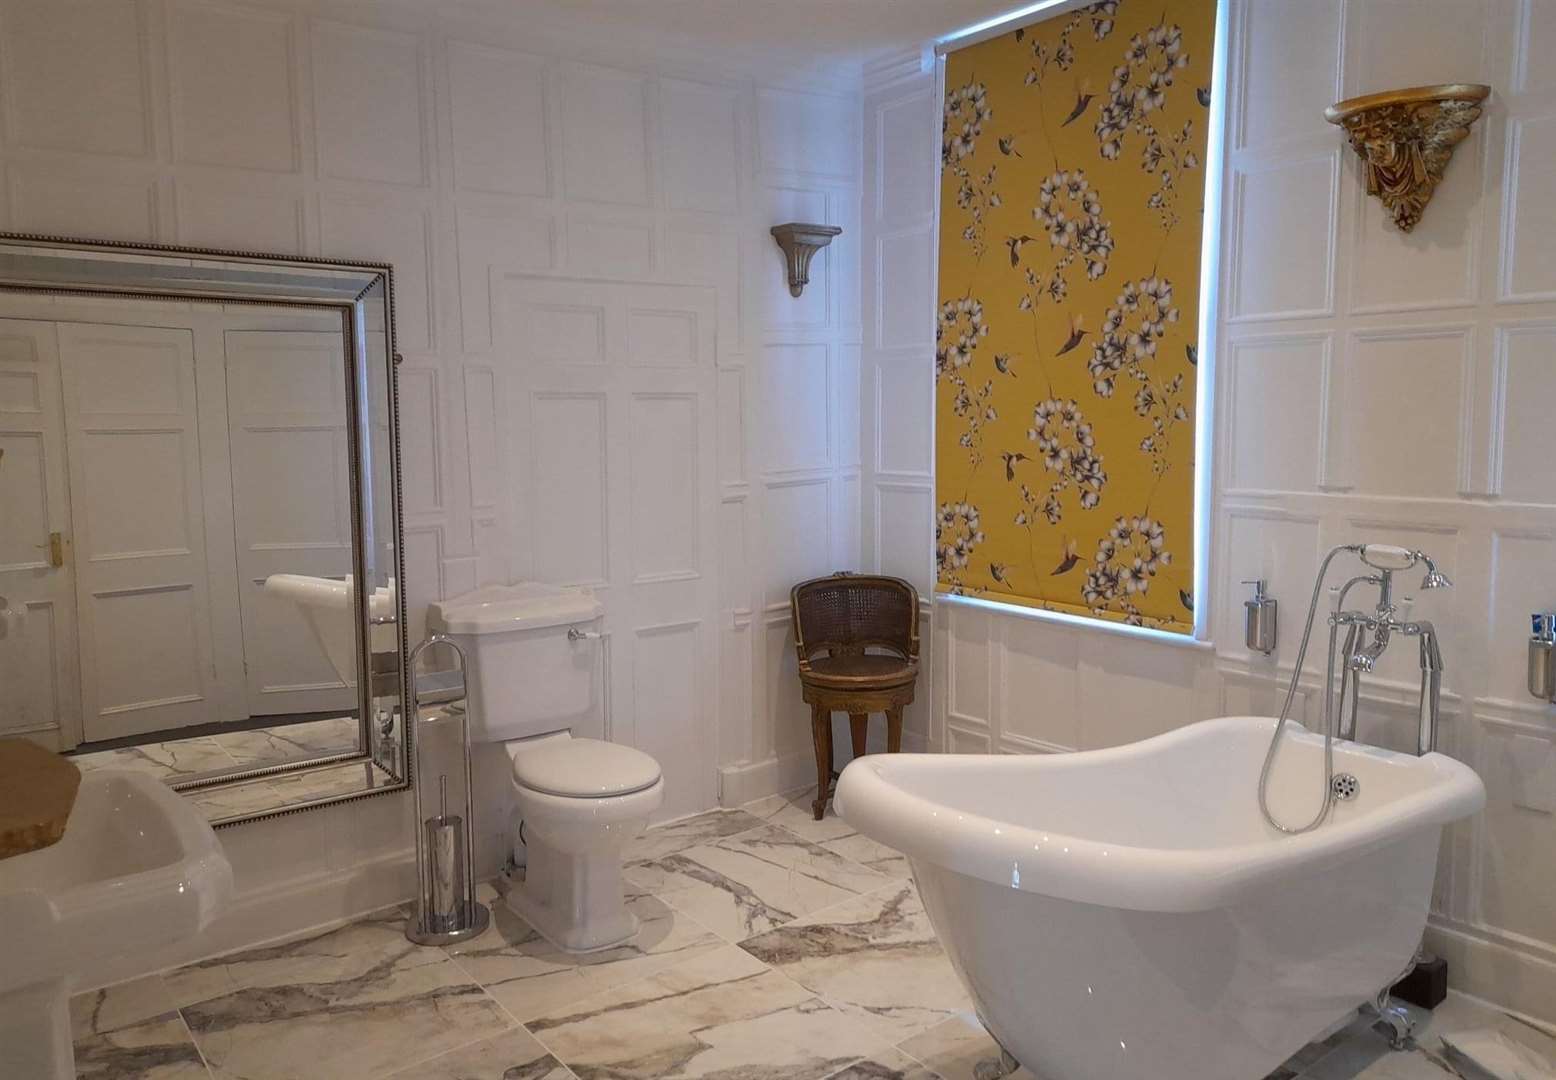 The Judge Huddlestone bathroom, which has been fully restored and decorated. Picture: Stone Court House Facebook